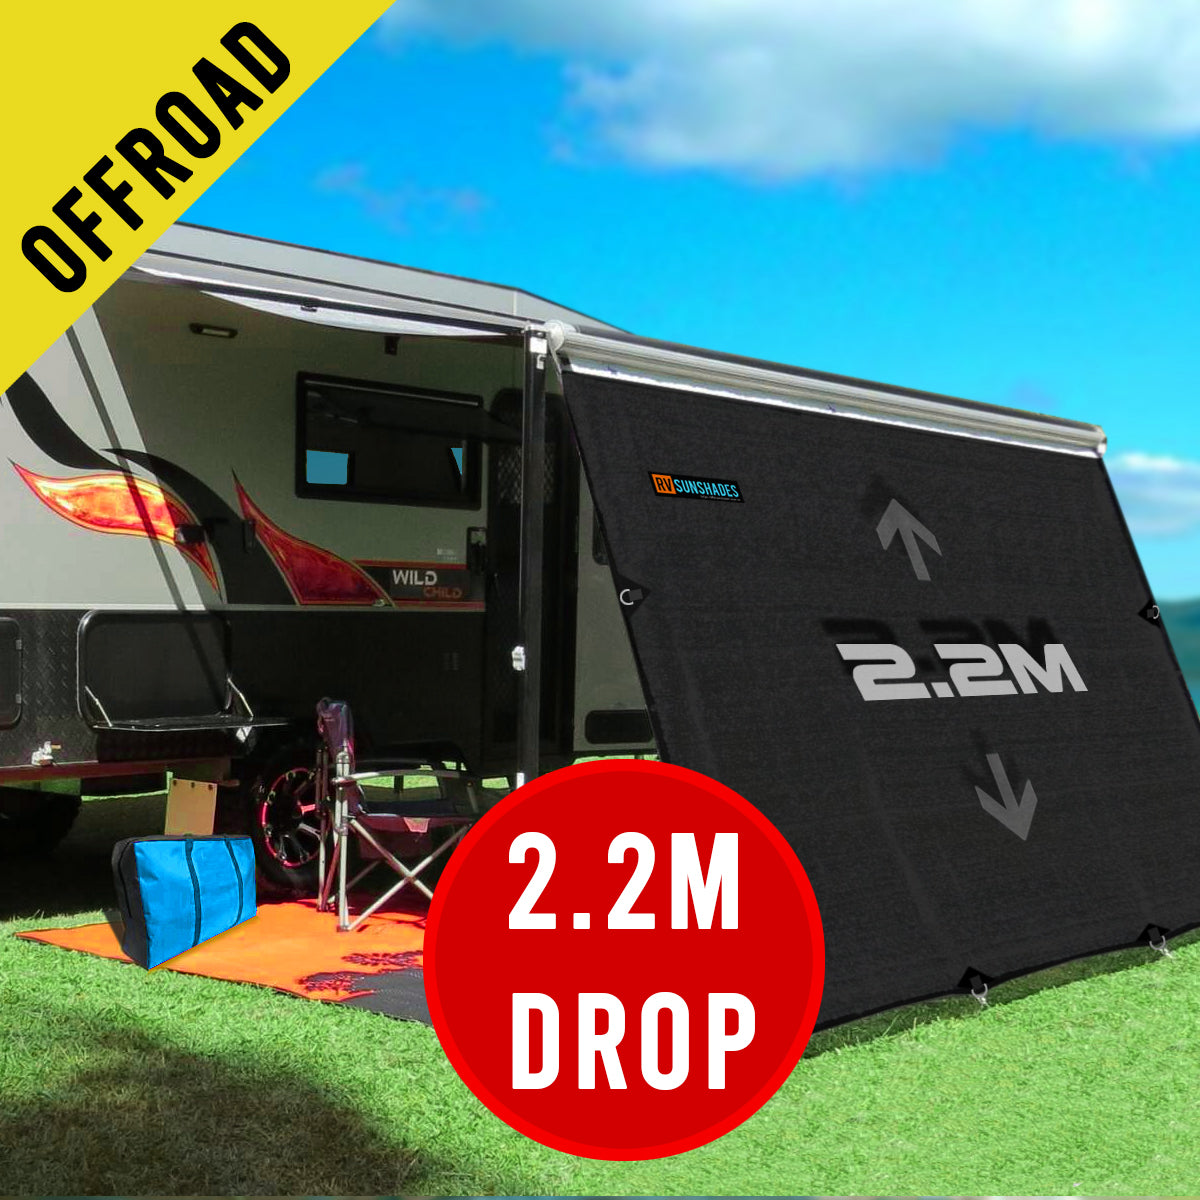 Offroad Caravan Privacy Screen 4.0x2.2m suit 14Ft Awning (2.2m Drop) iNSANE.SALE